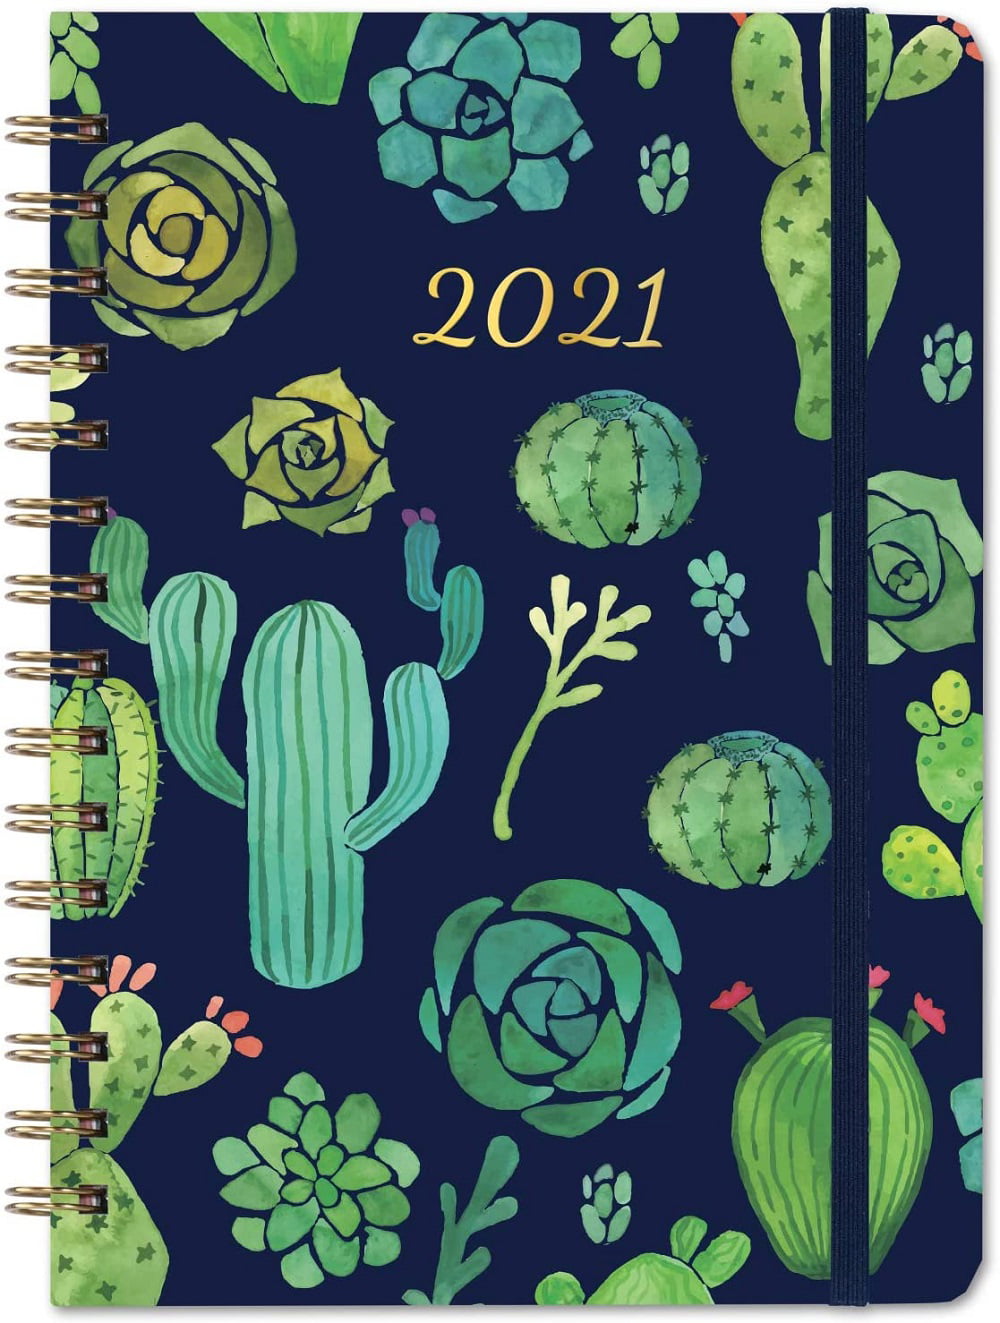 2021 Weekly & Monthly Planner with Hard Cover Jan 2021 Planner 6.4'' x 8.5'' 